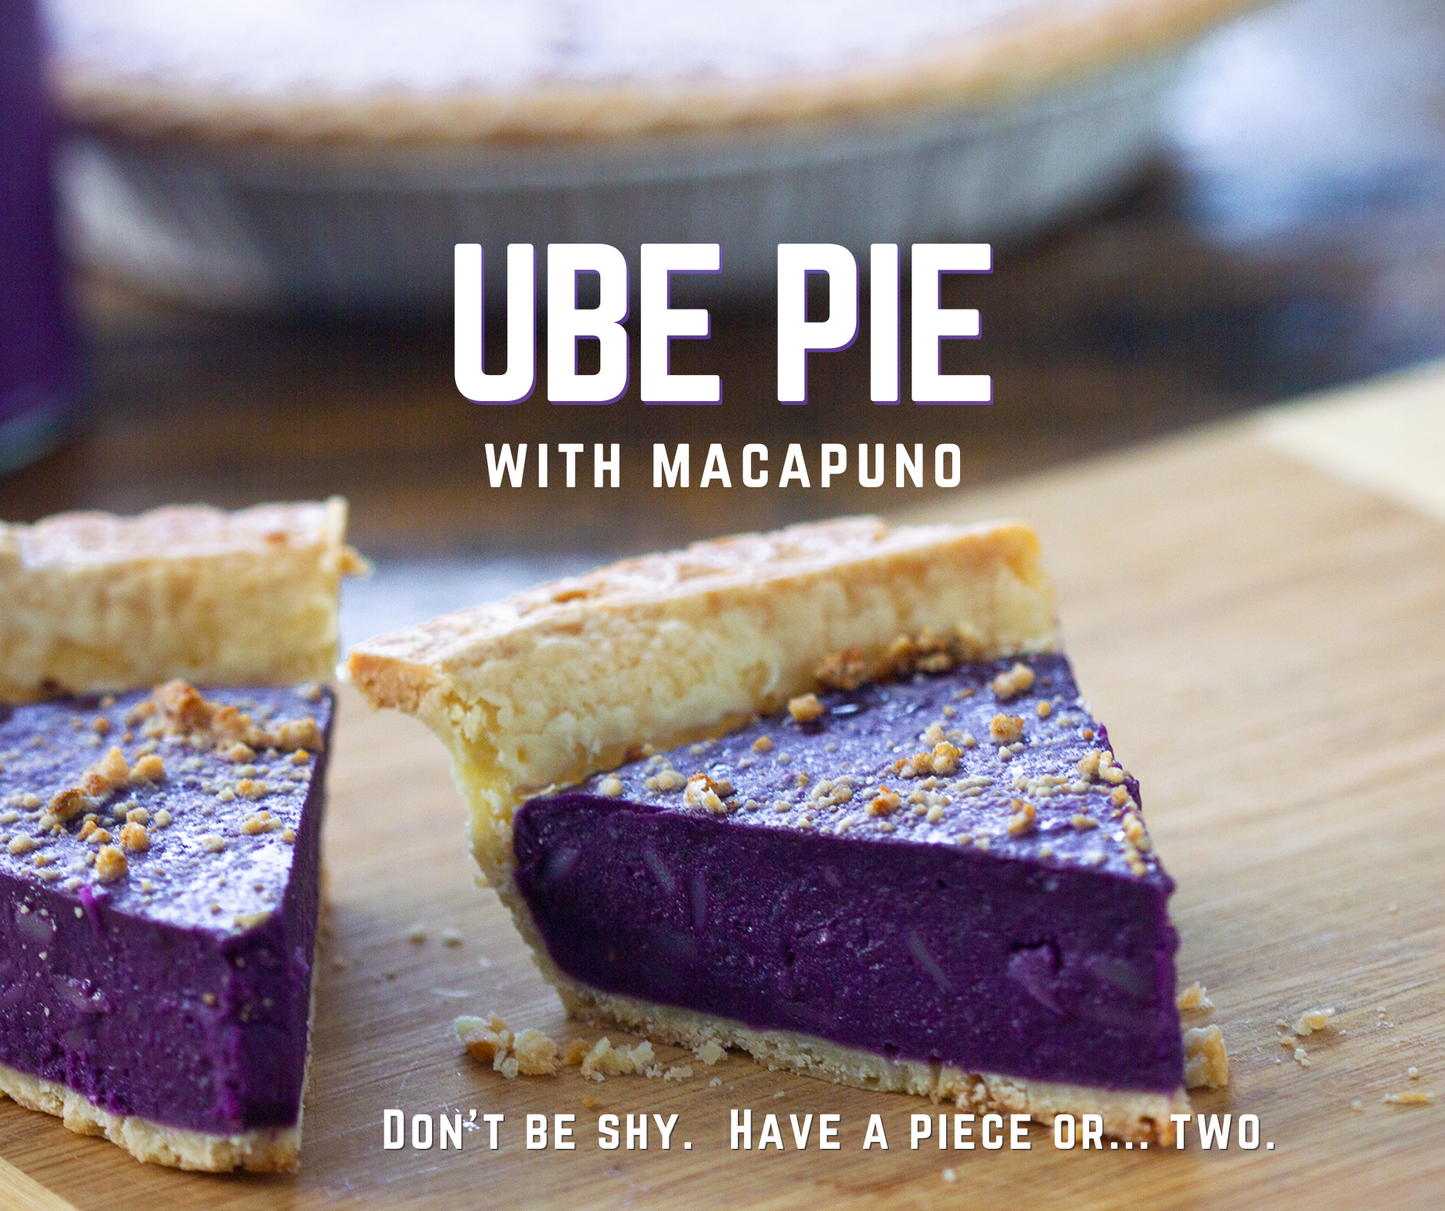 Made to Order Ube Pie with Macapuno (Coconut Sports)